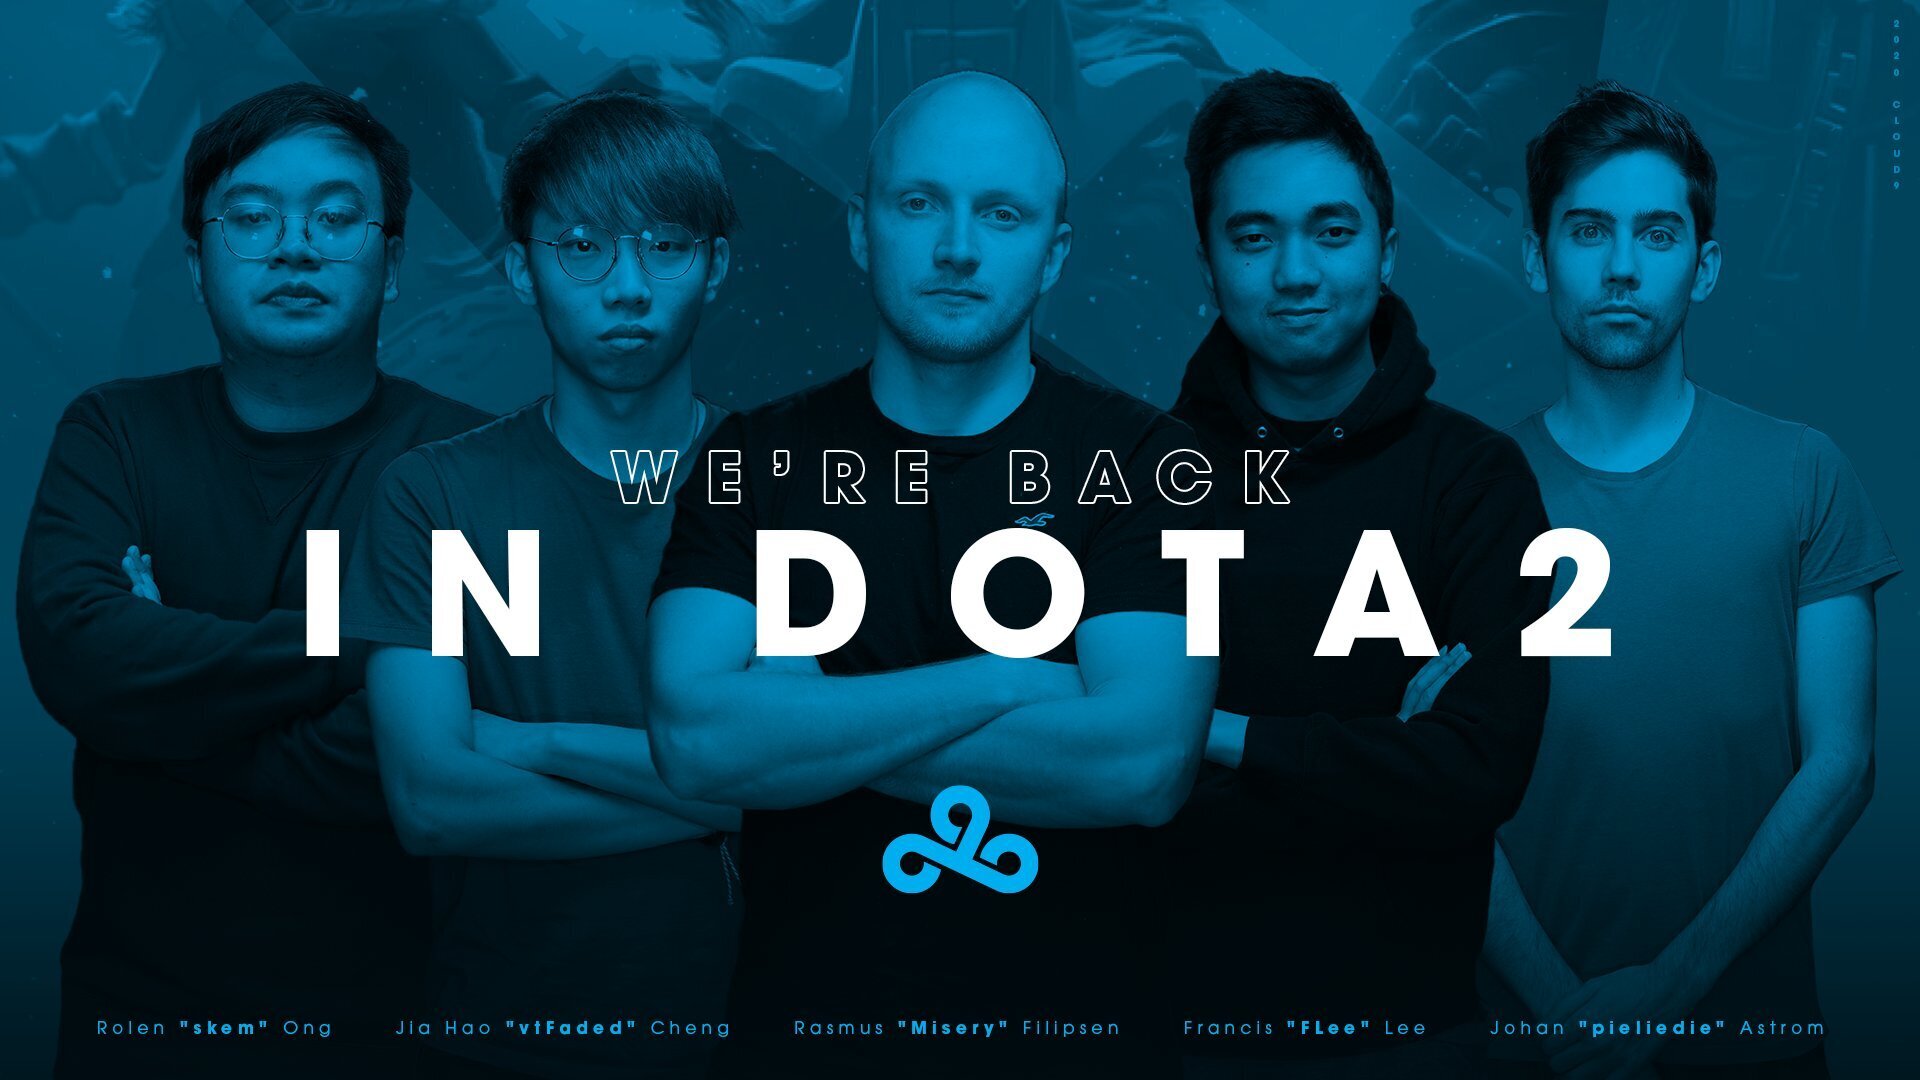 pieliedie and MISERY make their return to C9 in a surprise announcement (Image via Cloud9)